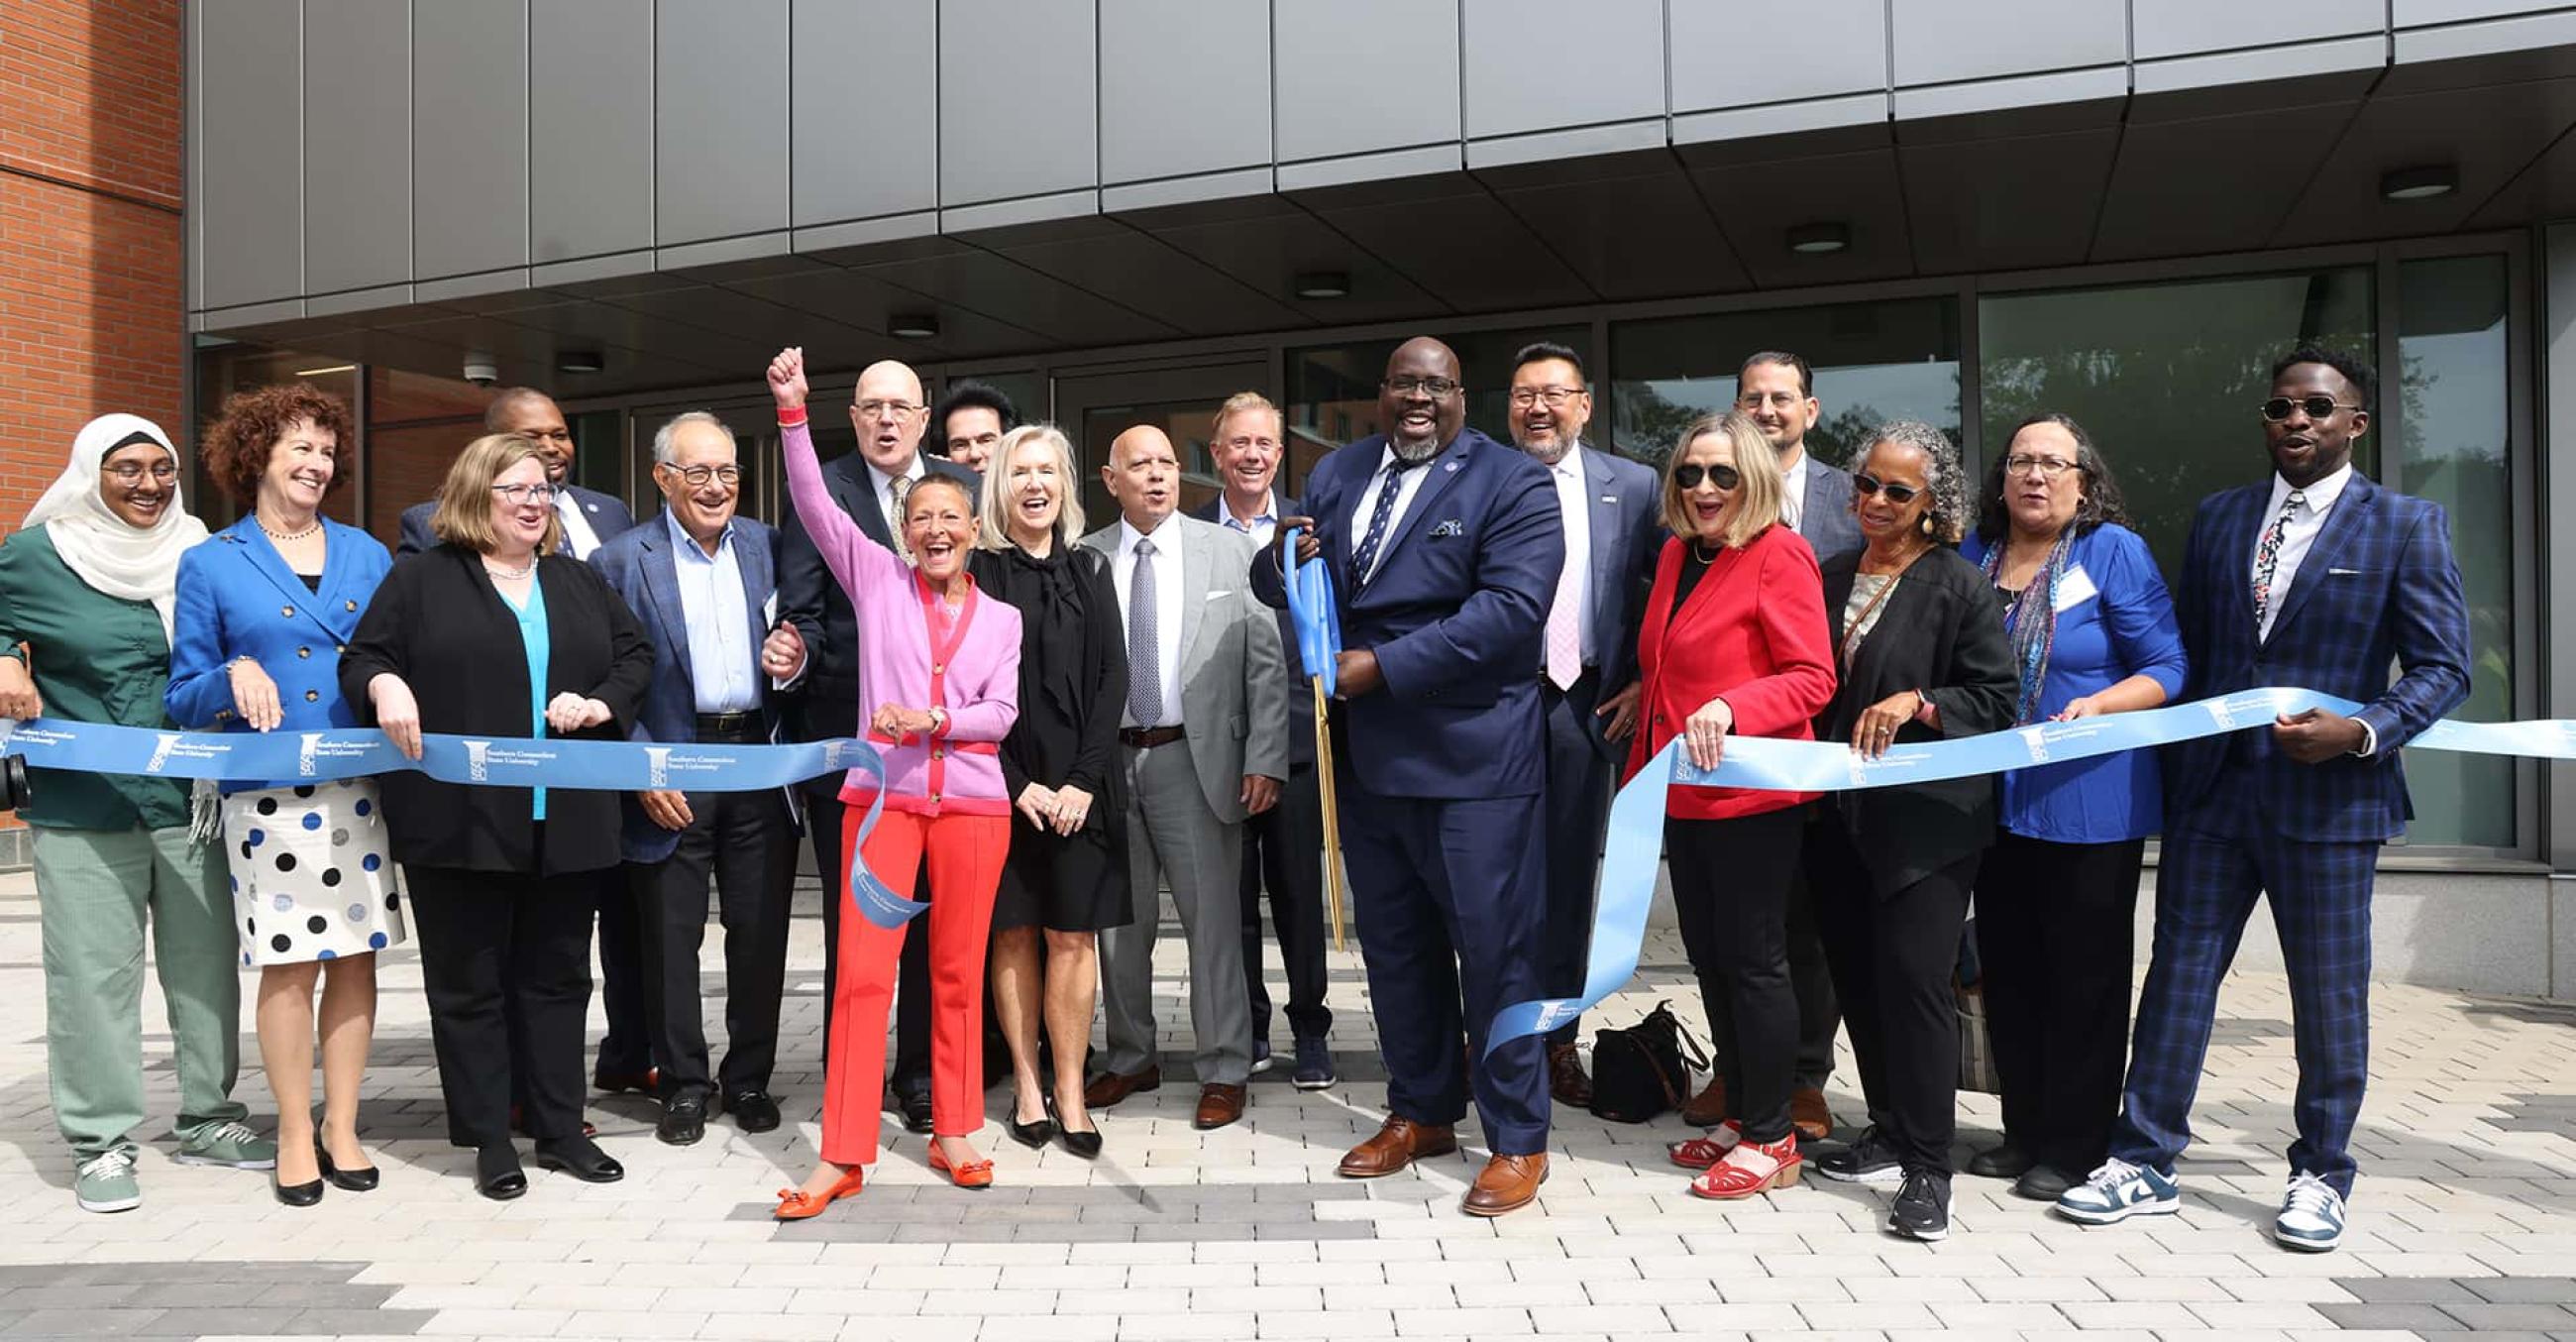 Interim President Dwayne Smith, center, cuts the ribbon on the new School of Business, with the assistance of CSCU Chancellor Terrence Cheng, Governor Ned Lamont, School of Business Dean Jess Boronico, and distinguished guests